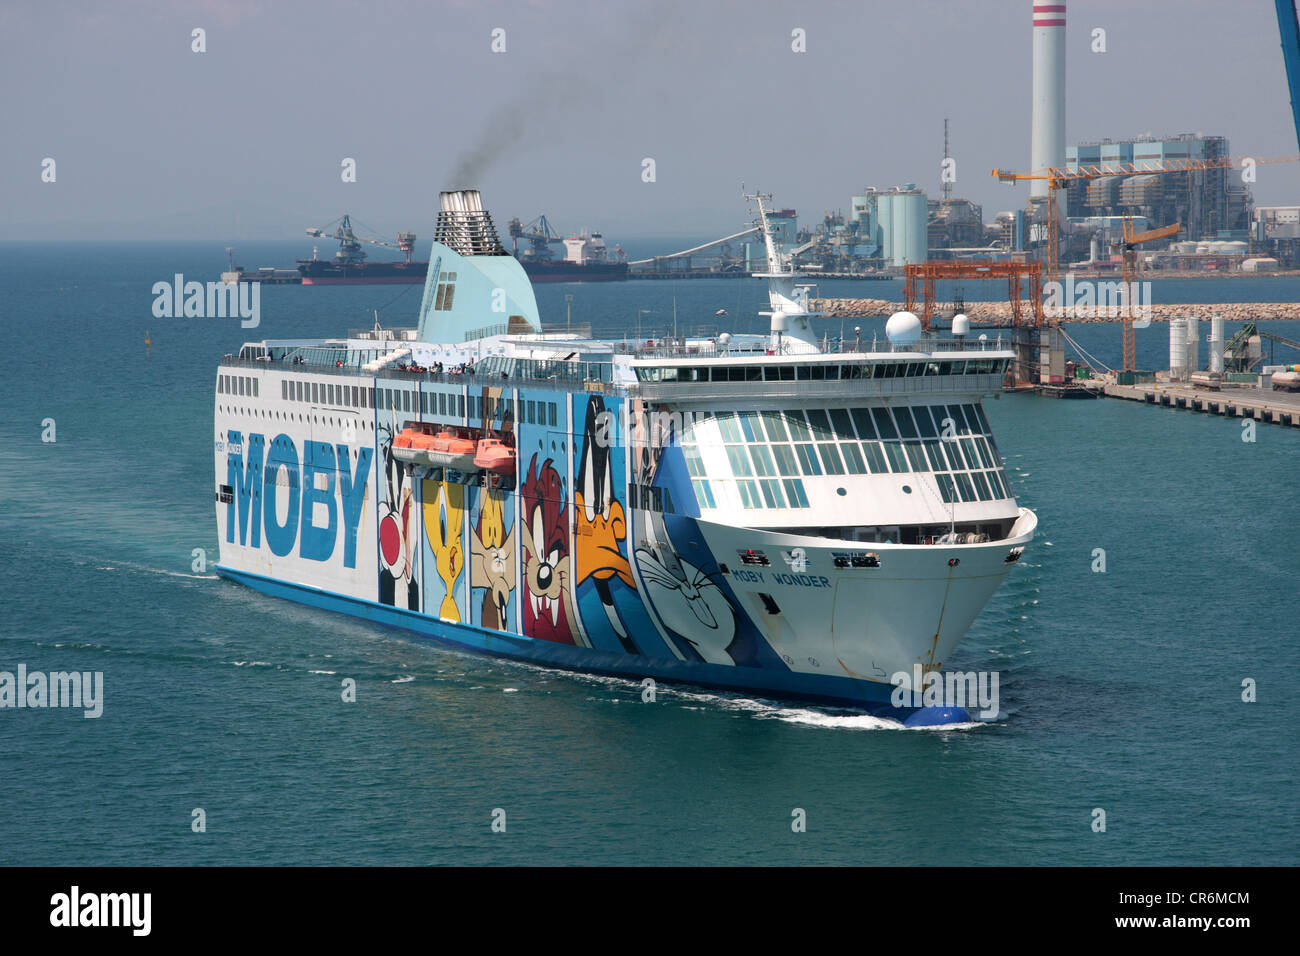 Cartoon characters painted on the side of the Moby Wonder car ferry  arriving at Civitavecchia, Italy Stock Photo - Alamy